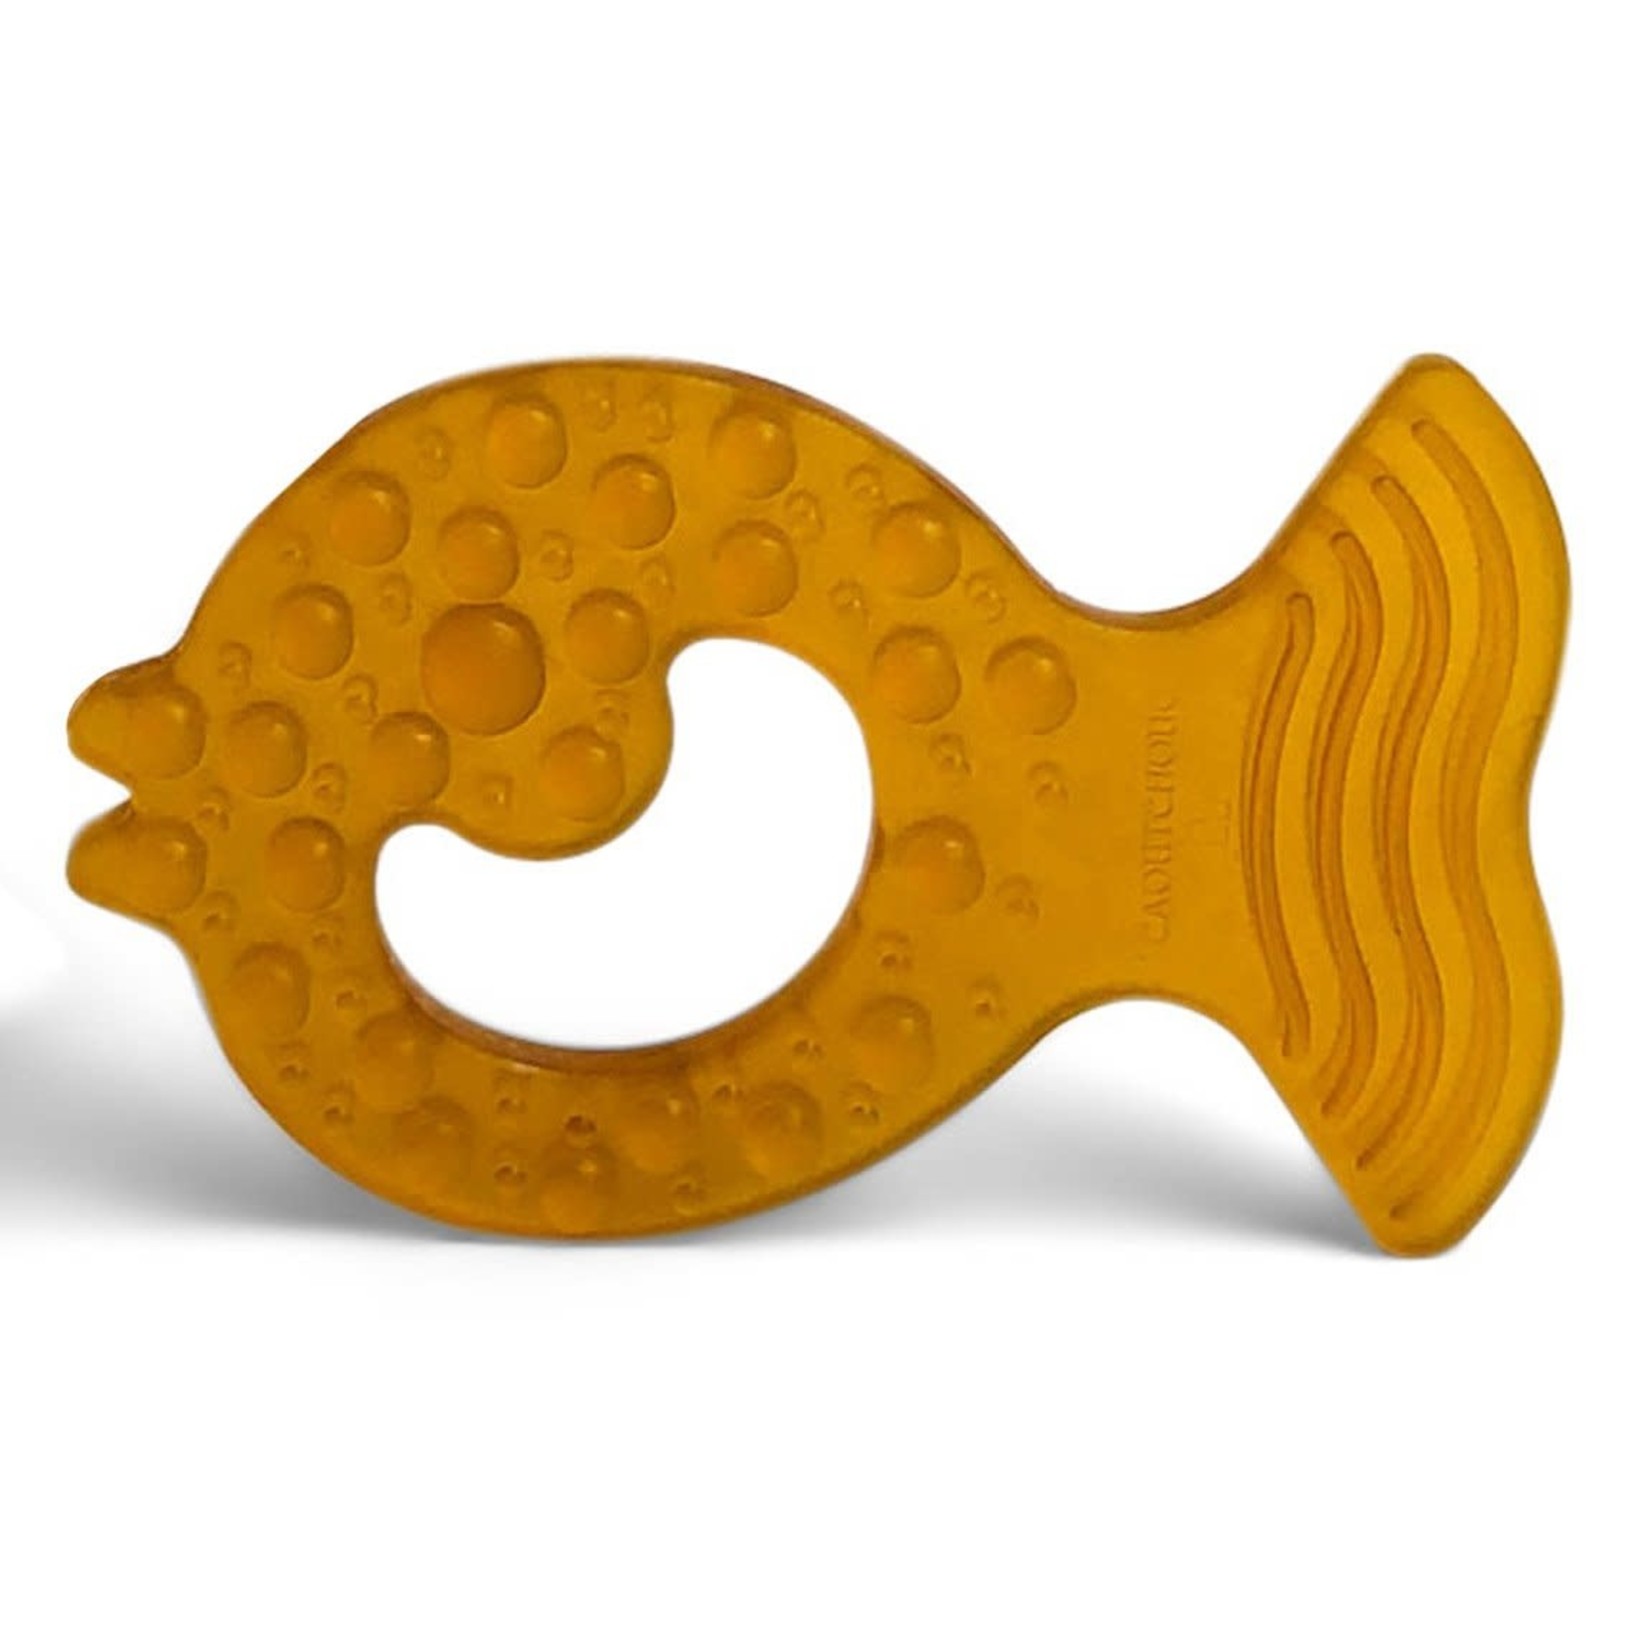 Natural Rubber Soother Natural Rubber Soother Fish Teether Twin Pack